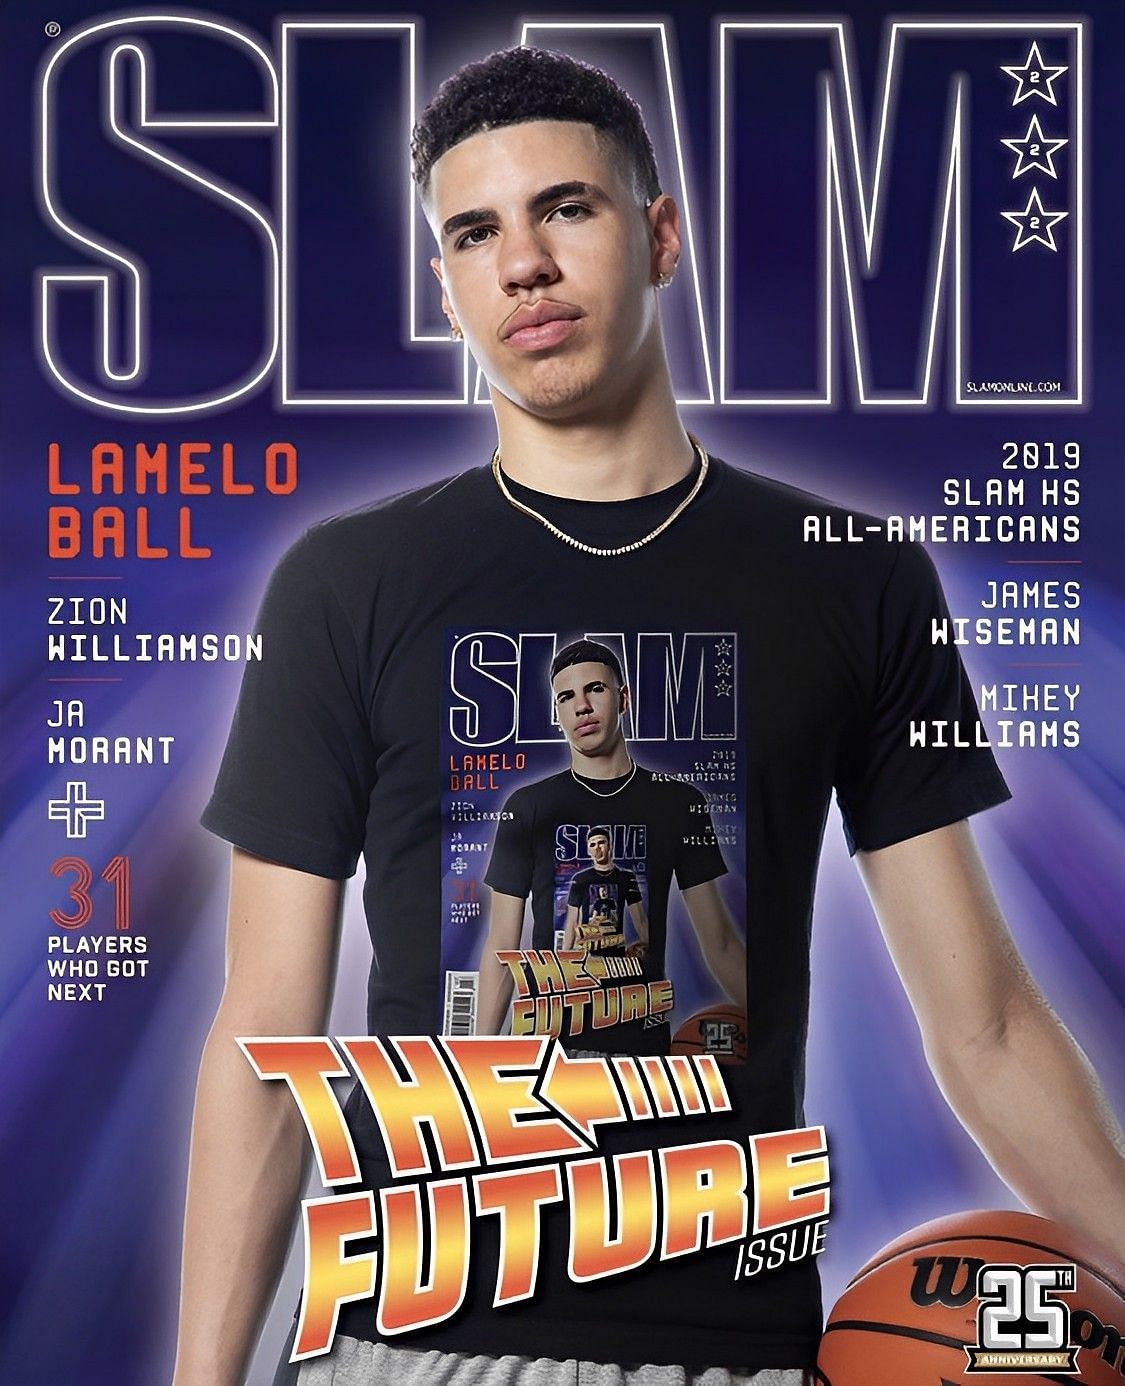 LaMelo Ball in the cover of SLAM